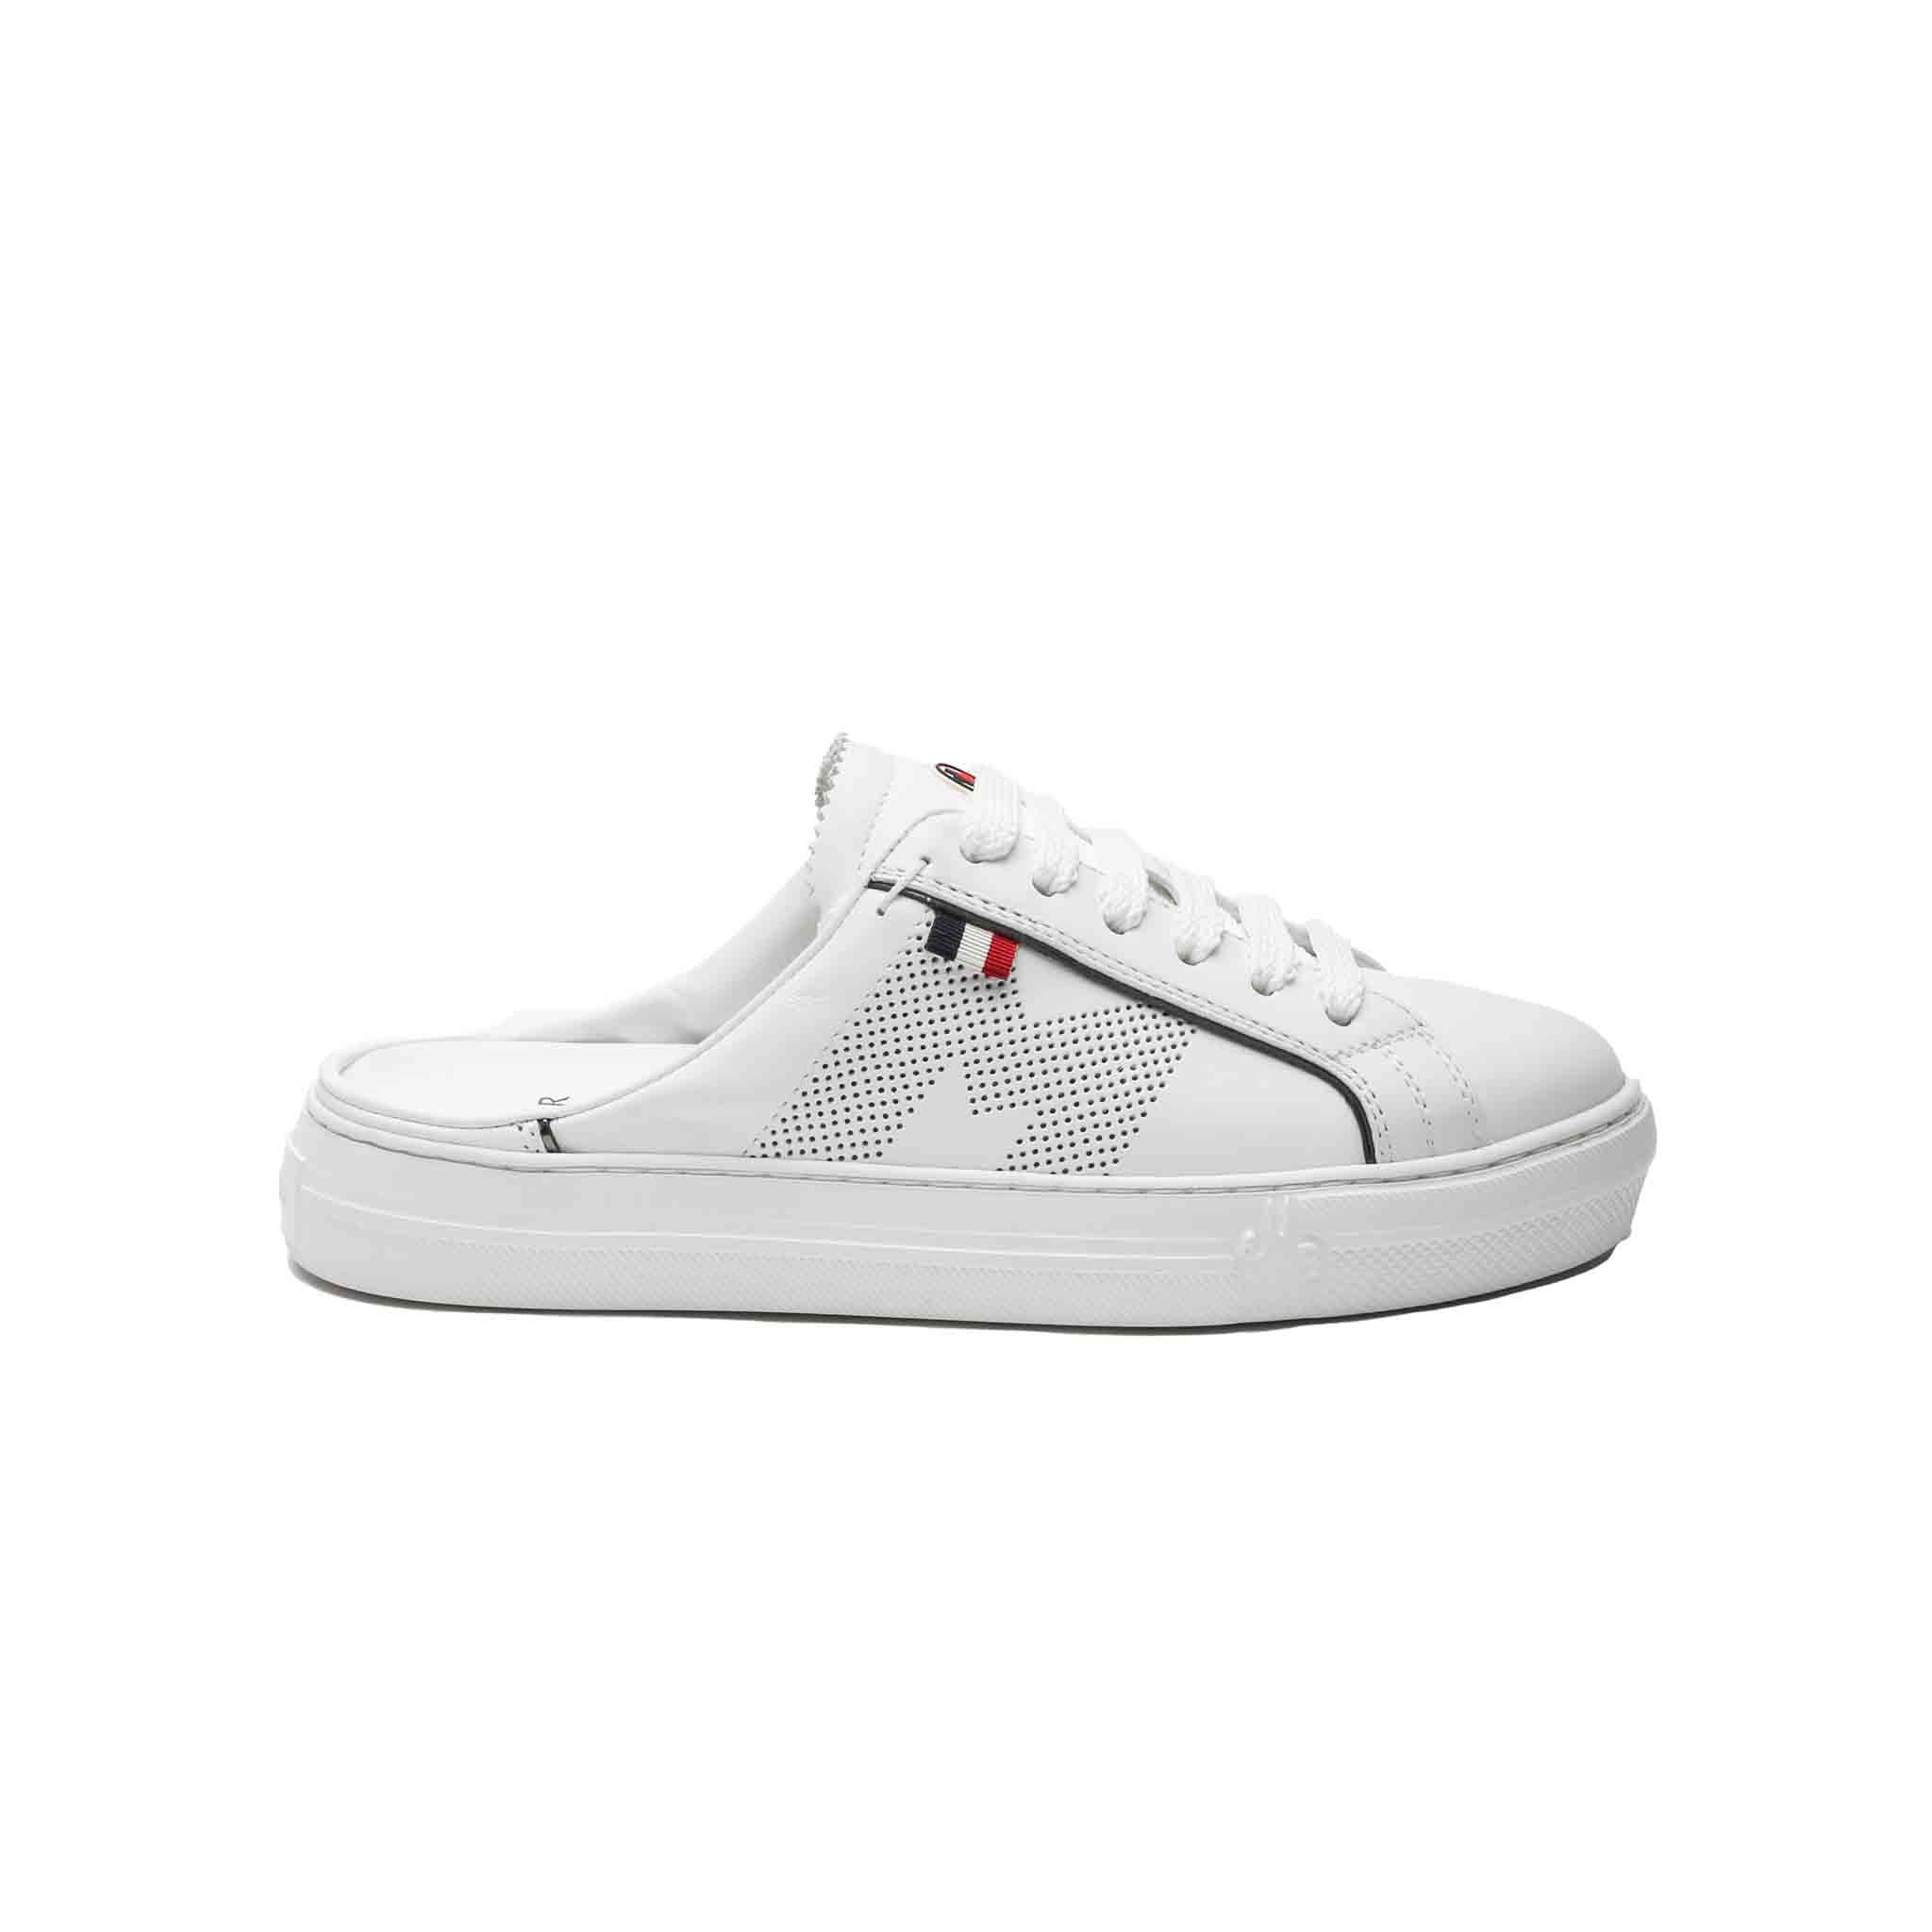 Classic Moncler Ariel sneaker has been given a summer face lift. Crafted from leather these are ideal for sitting around the pool or walking through the city. Moncler logo to the tongue with tri-colour tab to the side. Large perforated "M" to the outside. 